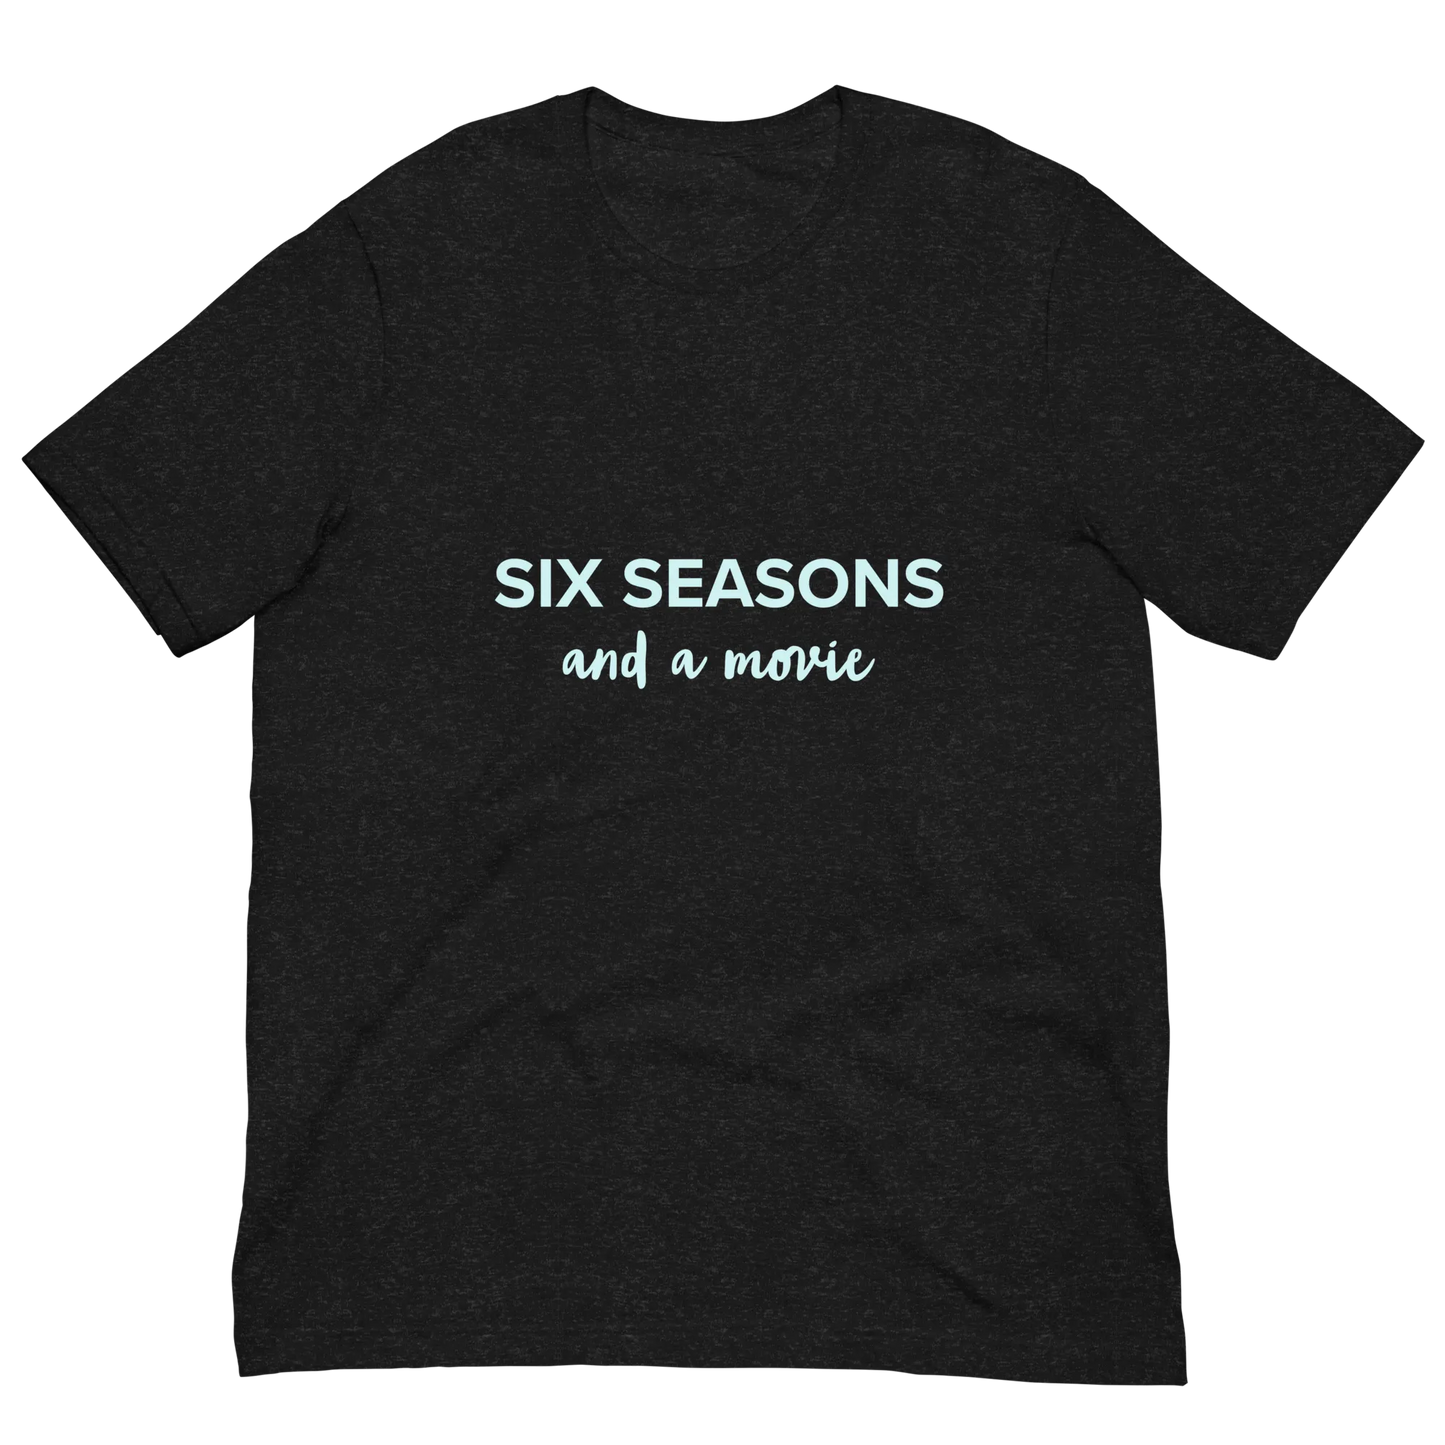 Six Seasons and a Movie Tee in Black Heather Plus-size flatlay